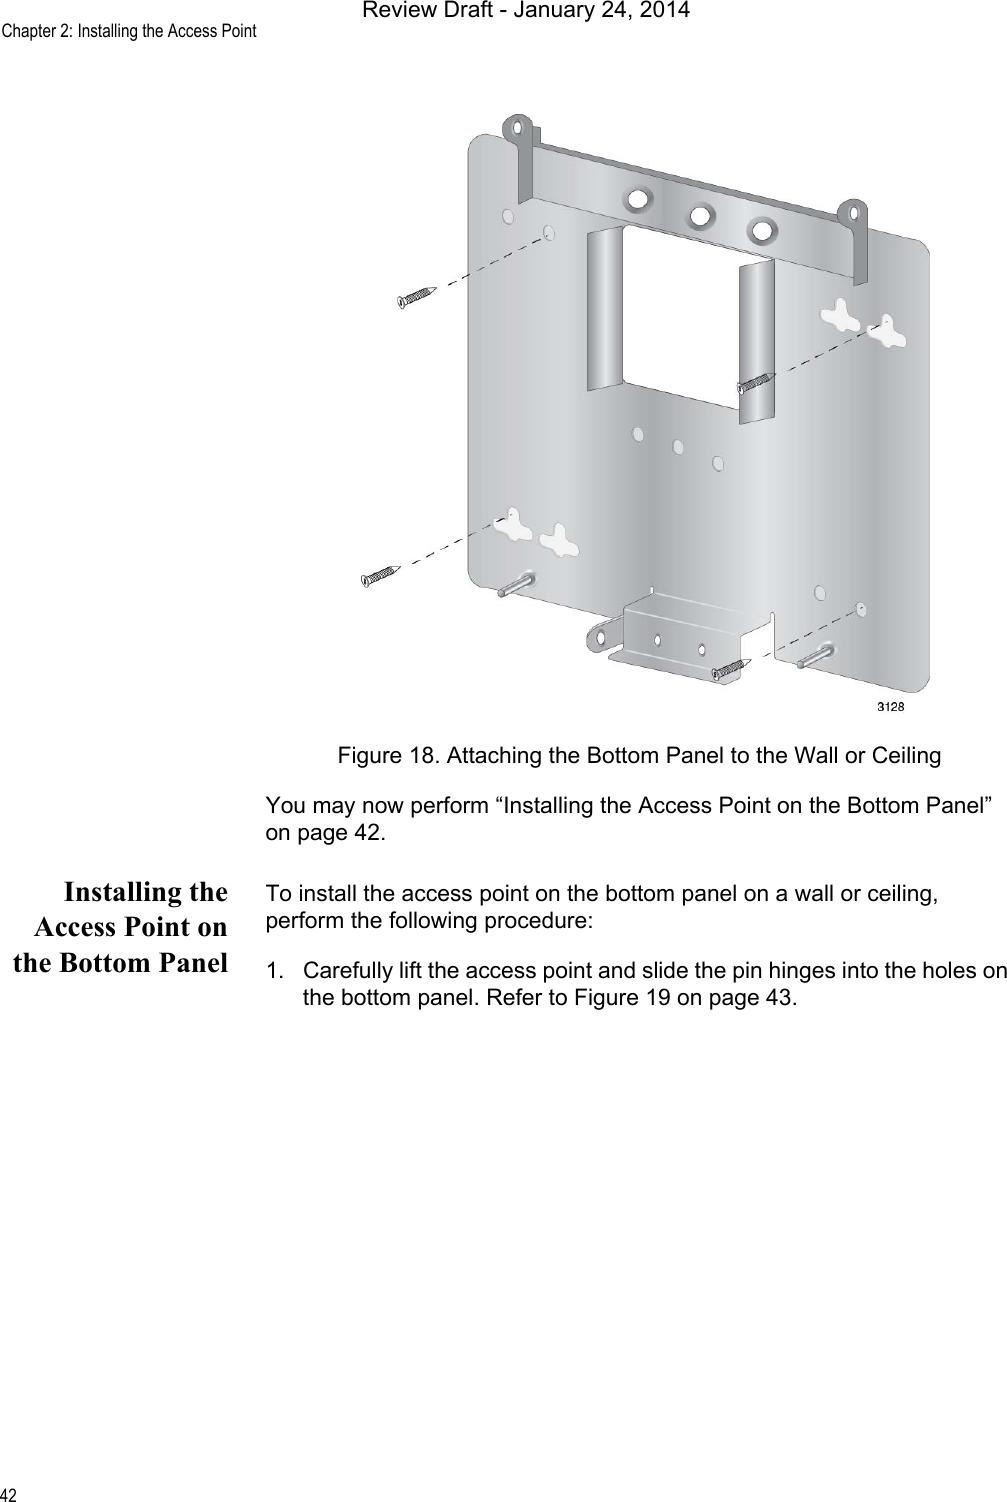 Chapter 2: Installing the Access Point42Figure 18. Attaching the Bottom Panel to the Wall or CeilingYou may now perform “Installing the Access Point on the Bottom Panel” on page 42.Installing theAccess Point onthe Bottom PanelTo install the access point on the bottom panel on a wall or ceiling, perform the following procedure:1. Carefully lift the access point and slide the pin hinges into the holes on the bottom panel. Refer to Figure 19 on page 43.Review Draft - January 24, 2014